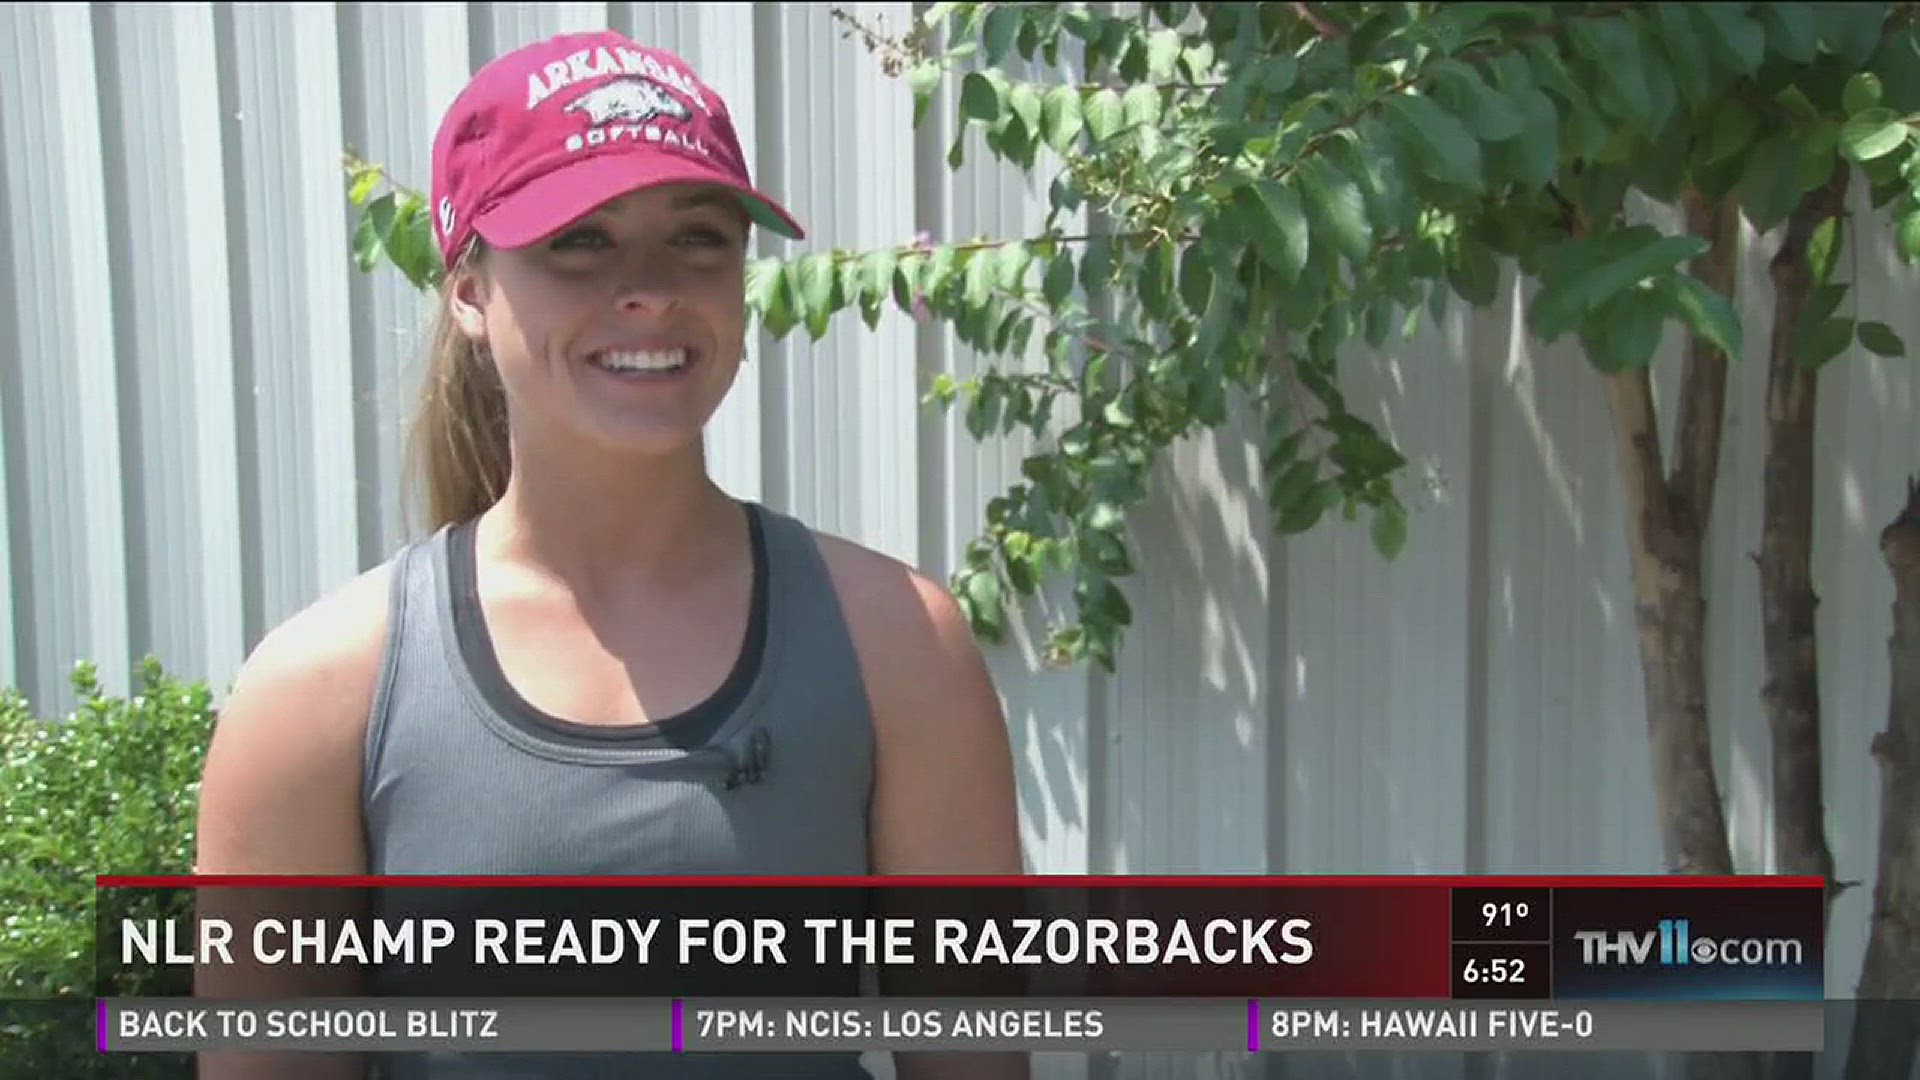 NLR Softball champ ready to join the Hogs